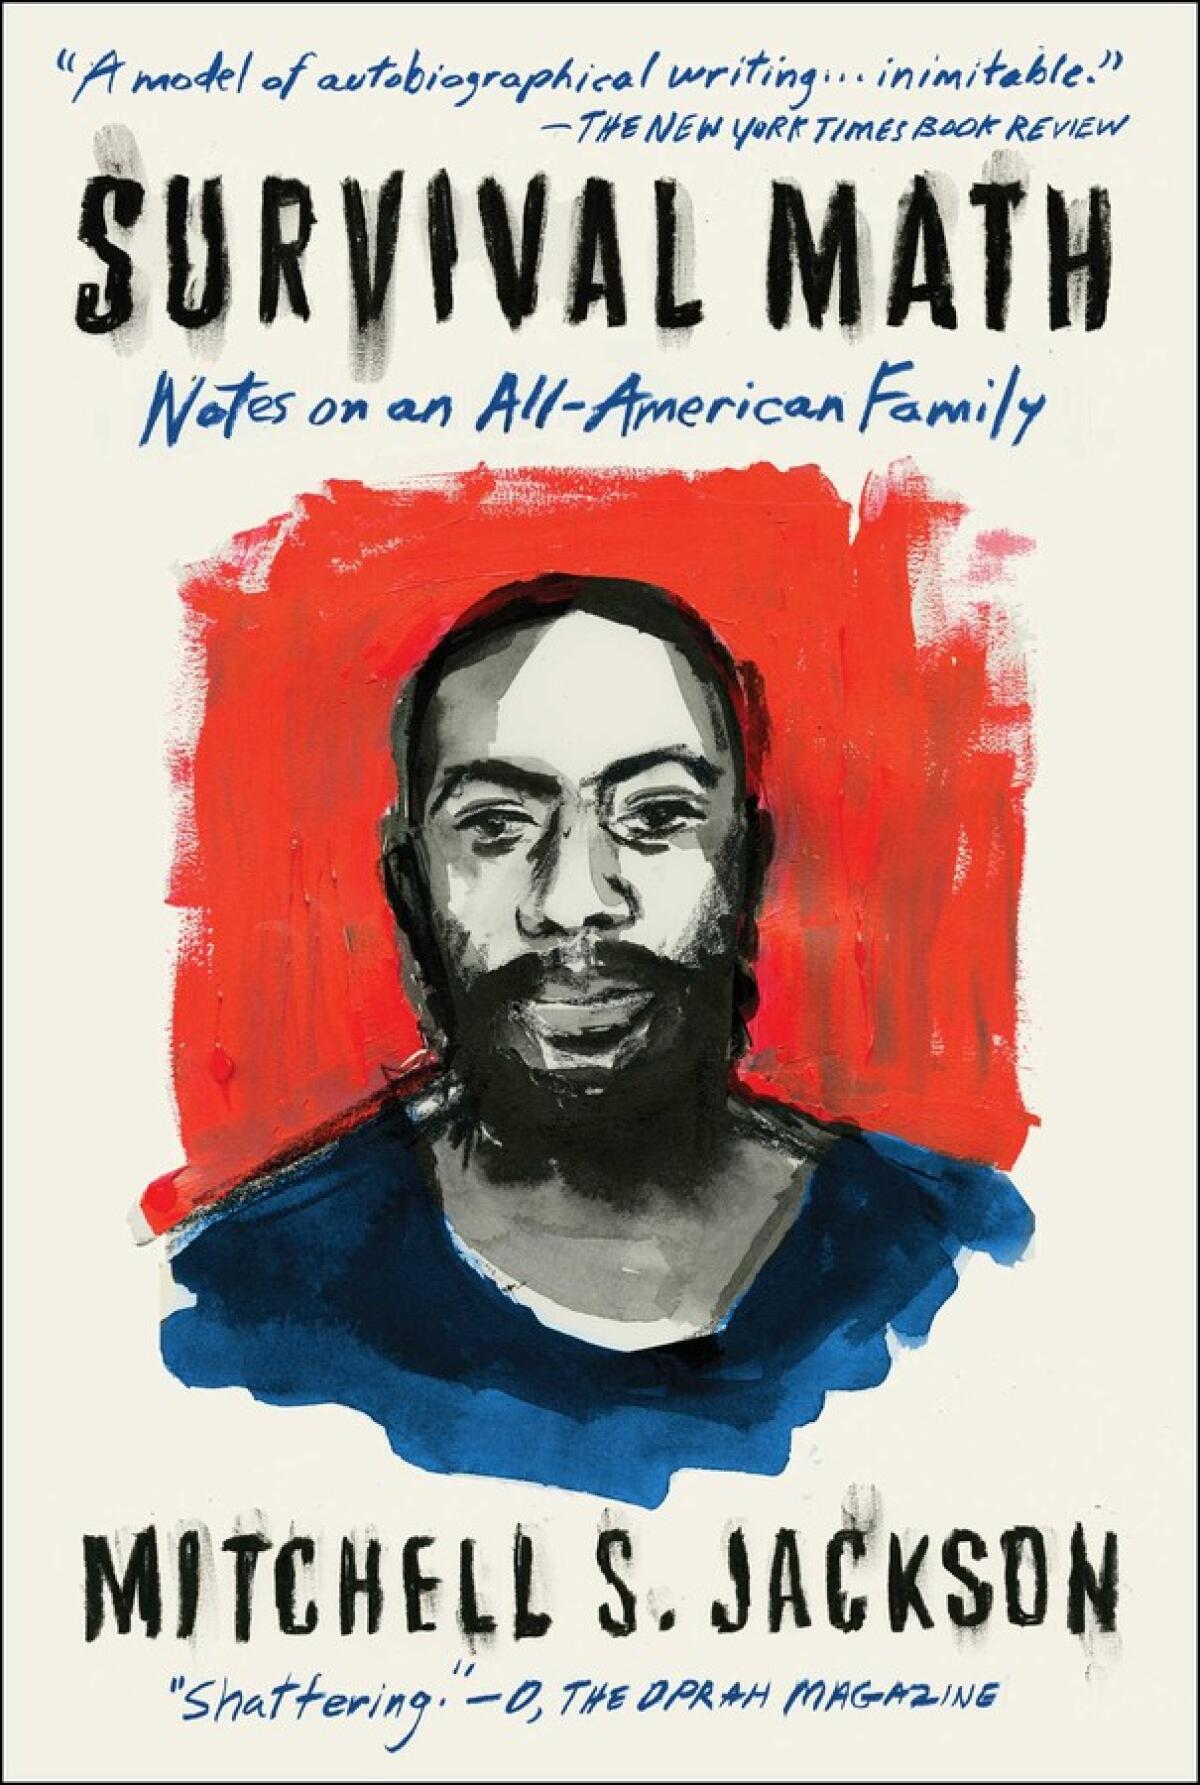 "Survival Math: Notes on an All-American Family" by Mitchell Jackson.